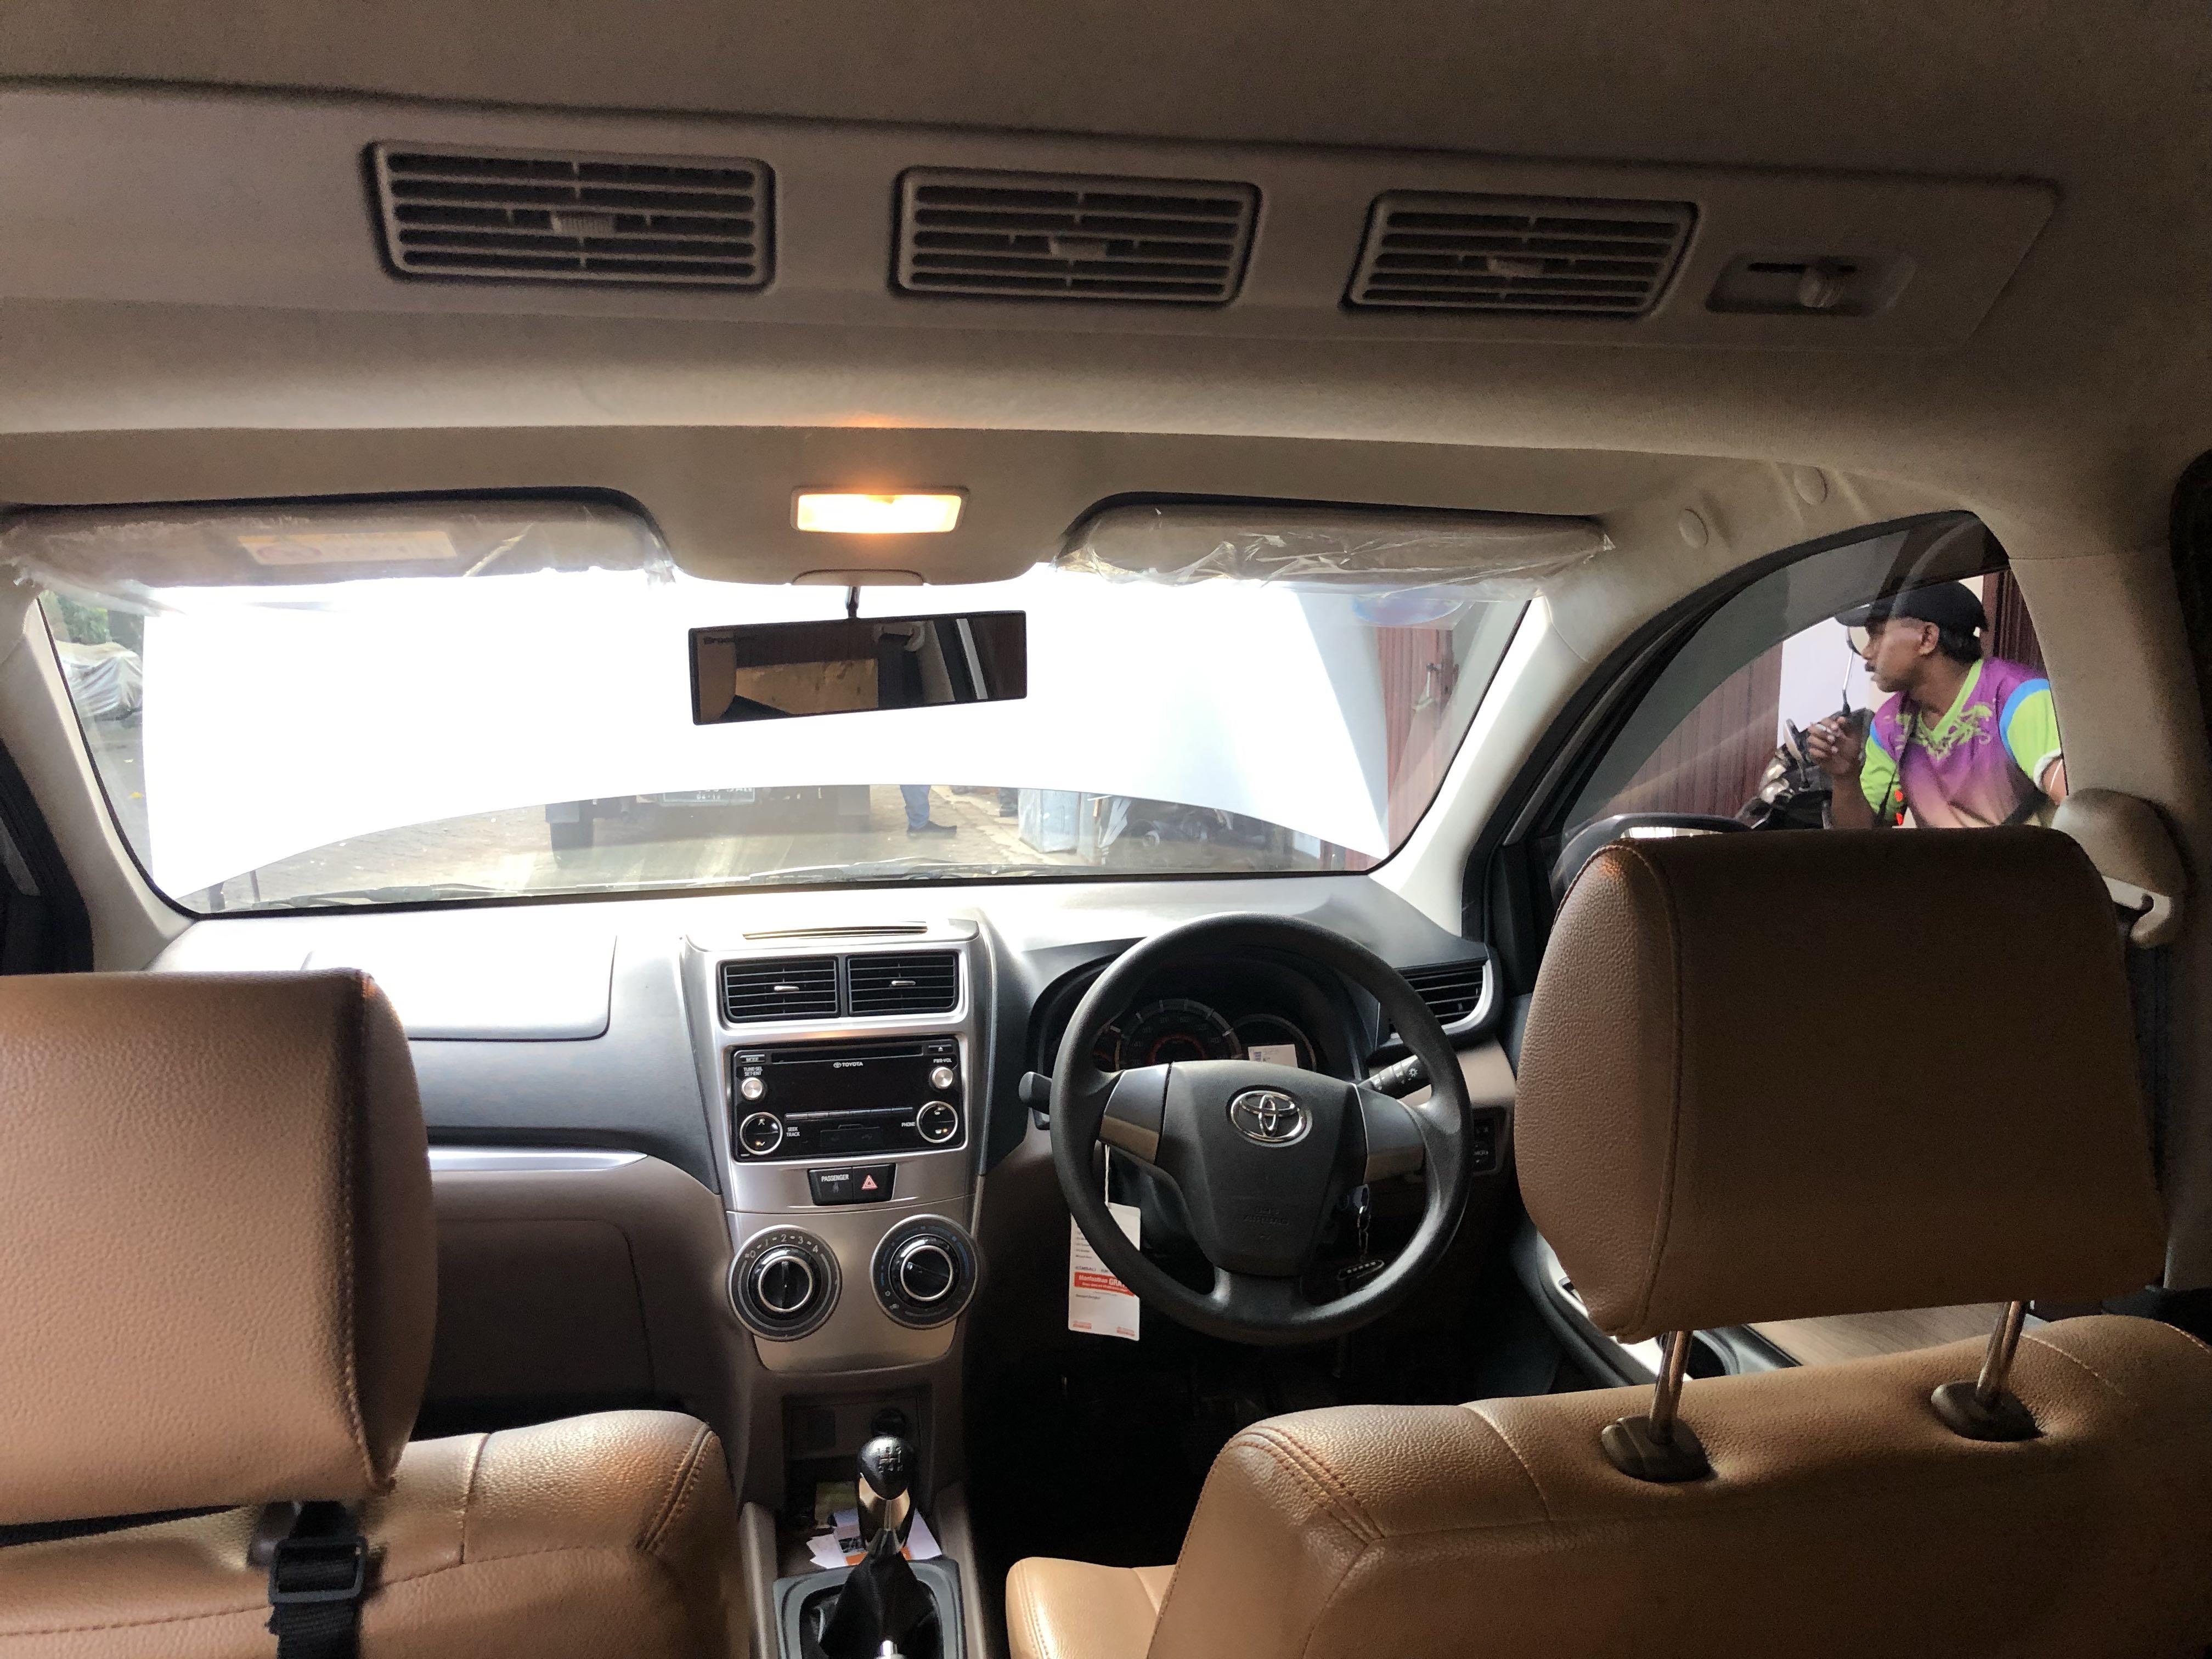 Toyota Avanza 1 3 G Manual Cars Cars For Sale On Carousell